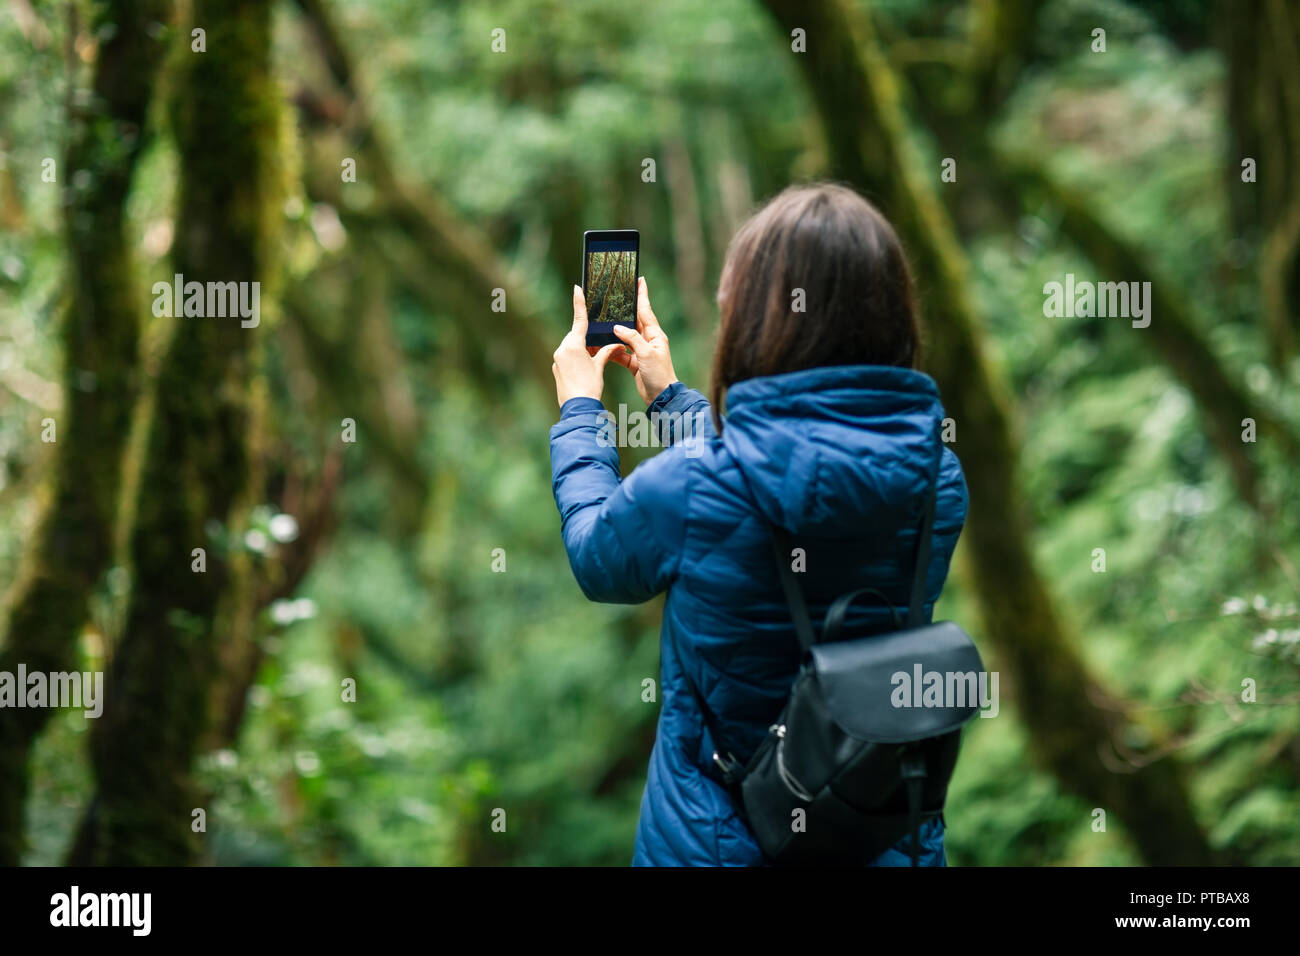 Young traveler woman taking a photo of forest landscape Stock Photo